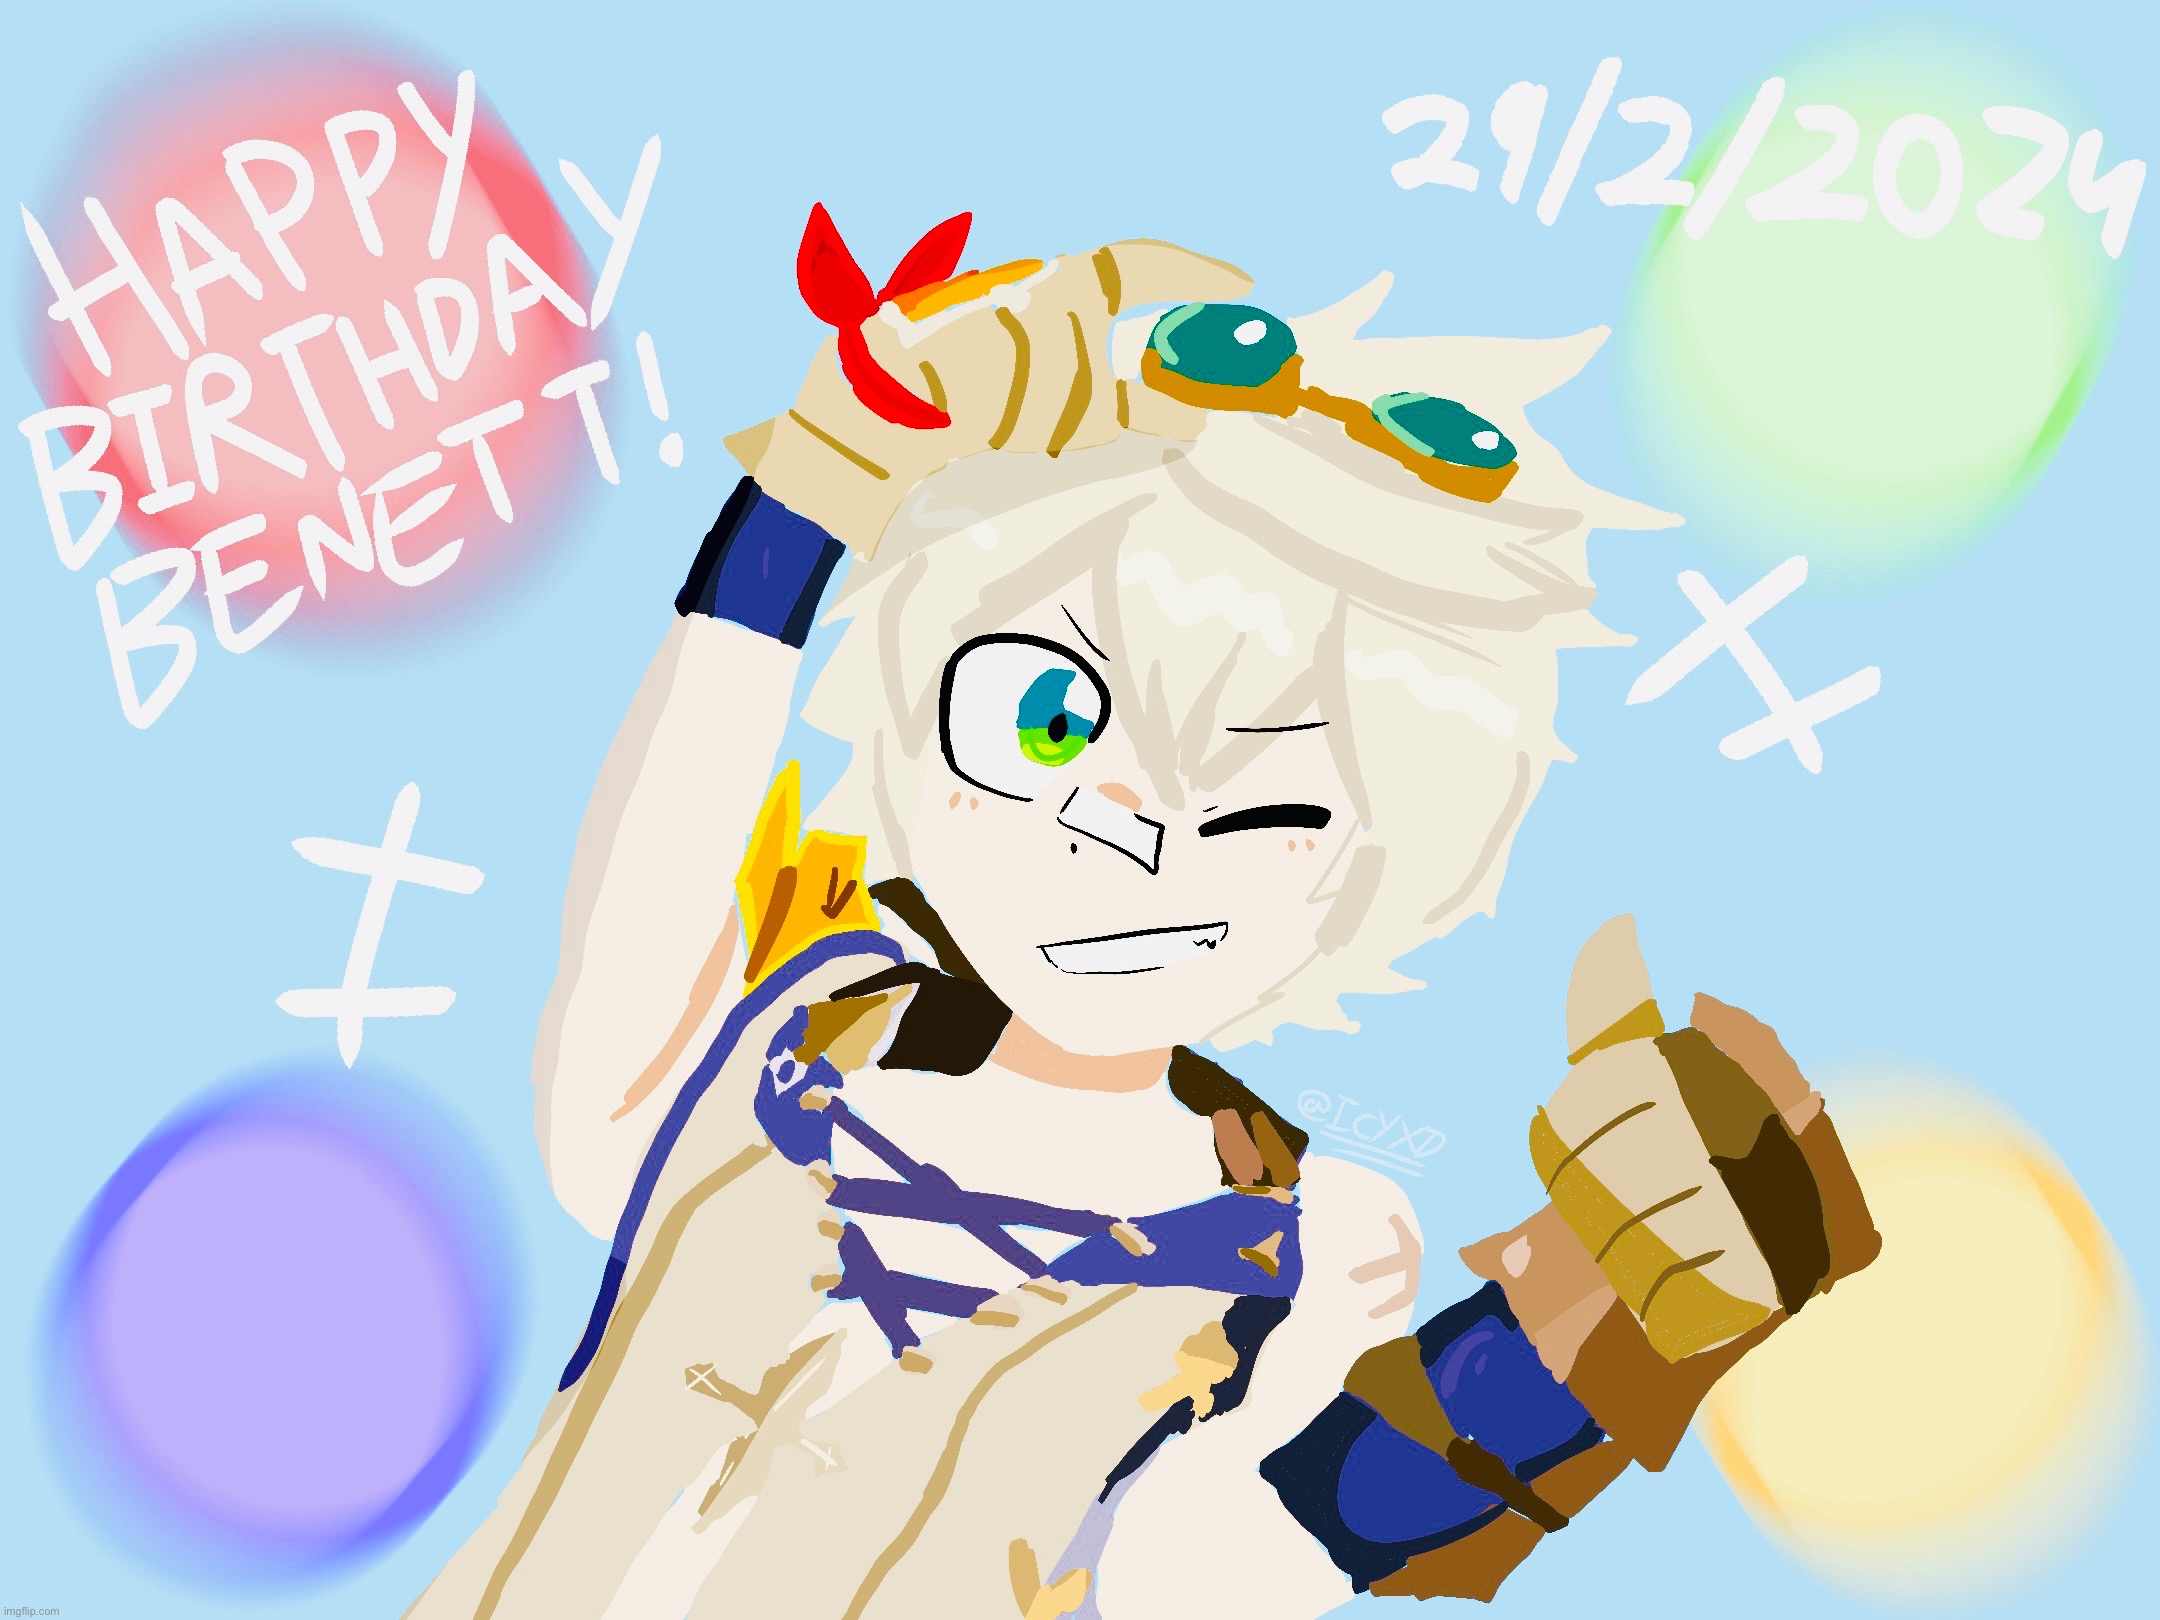 HAPPY BIRTHDAY BENETT! This year is a leap year, so we can actually celebrate his birthday! (⌒▽⌒) | image tagged in genshin impact,benett,anime,happy birthday,leap year | made w/ Imgflip meme maker